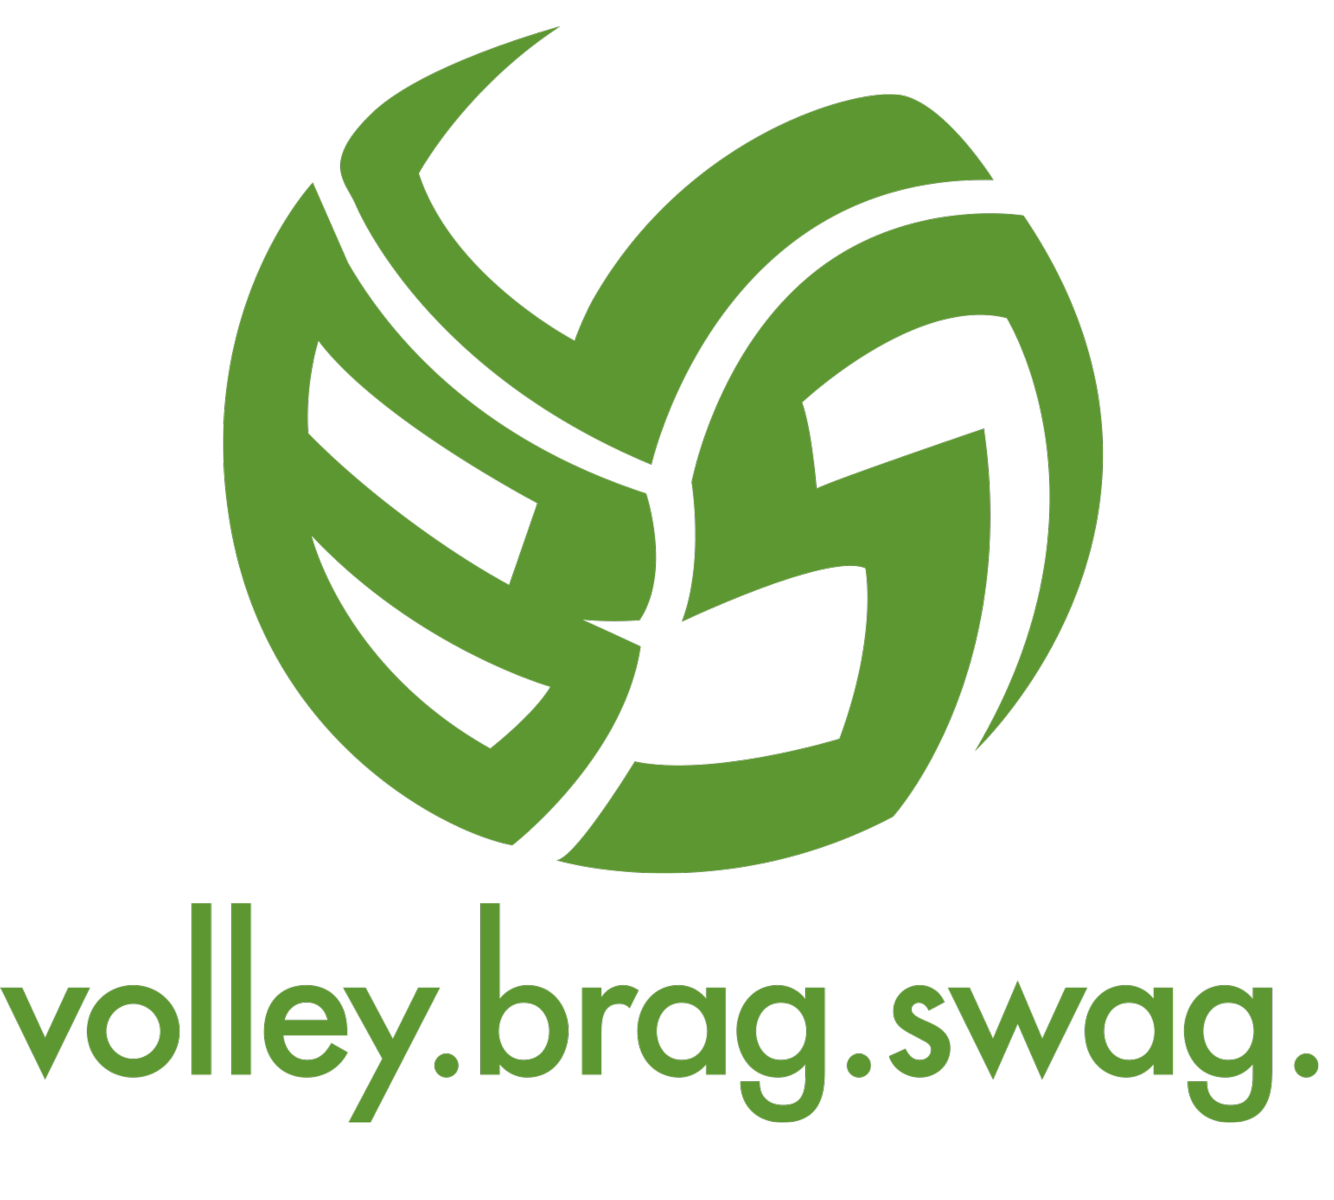 The Volleybragswag Volleyball Logos